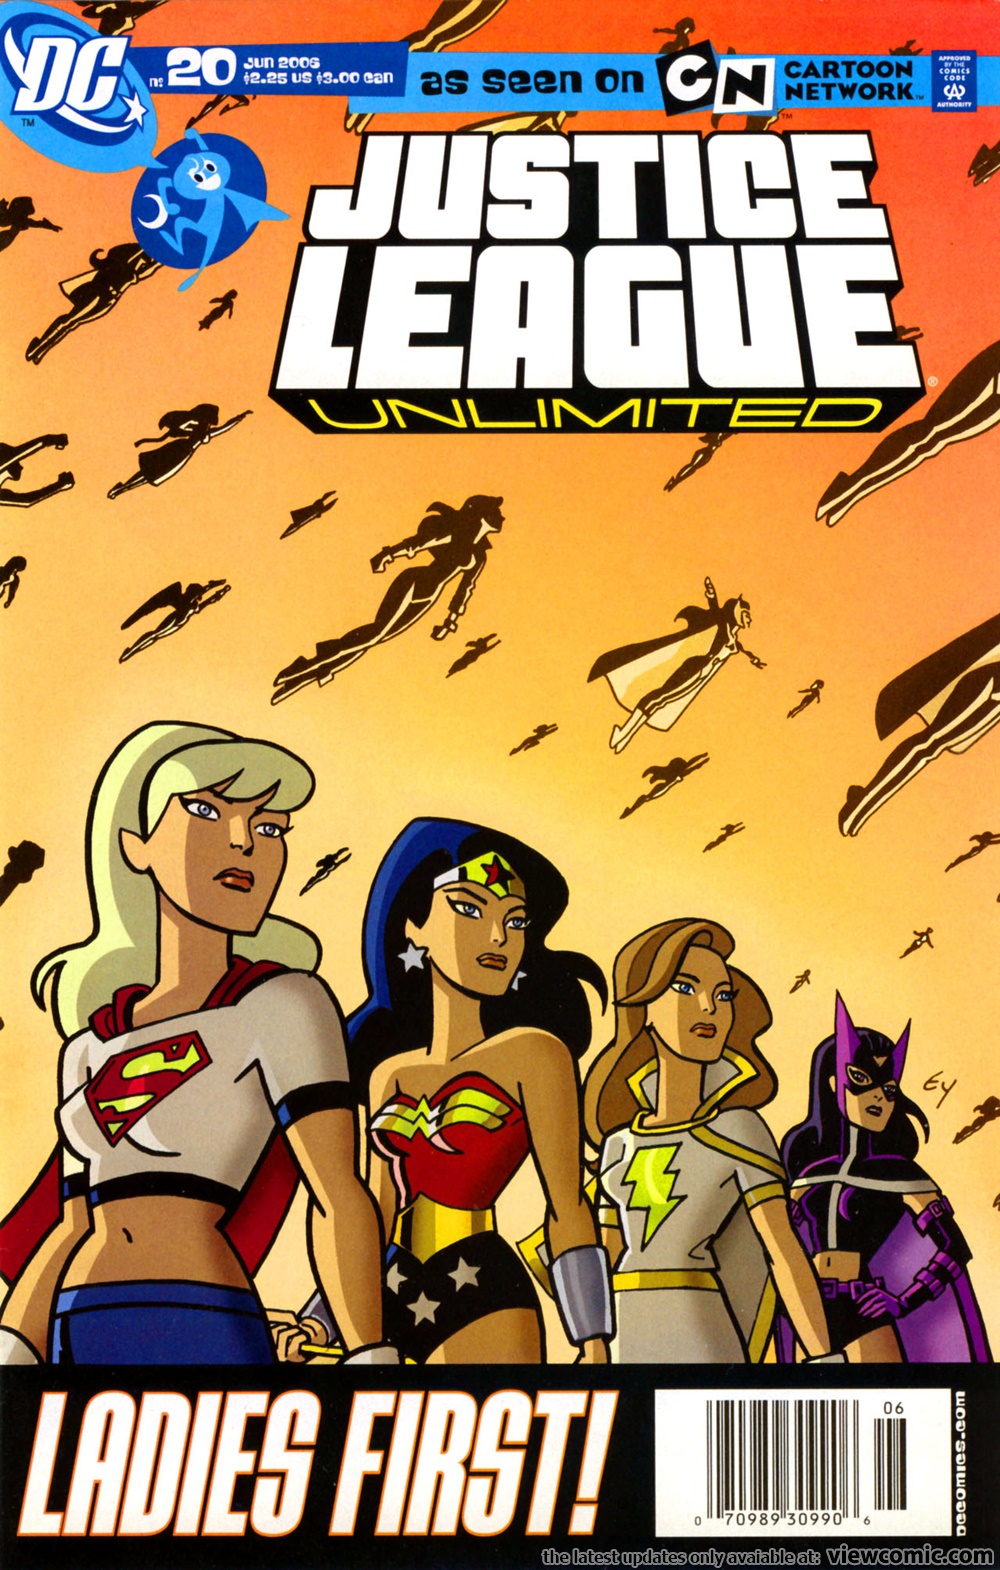 Justice league unlimited free